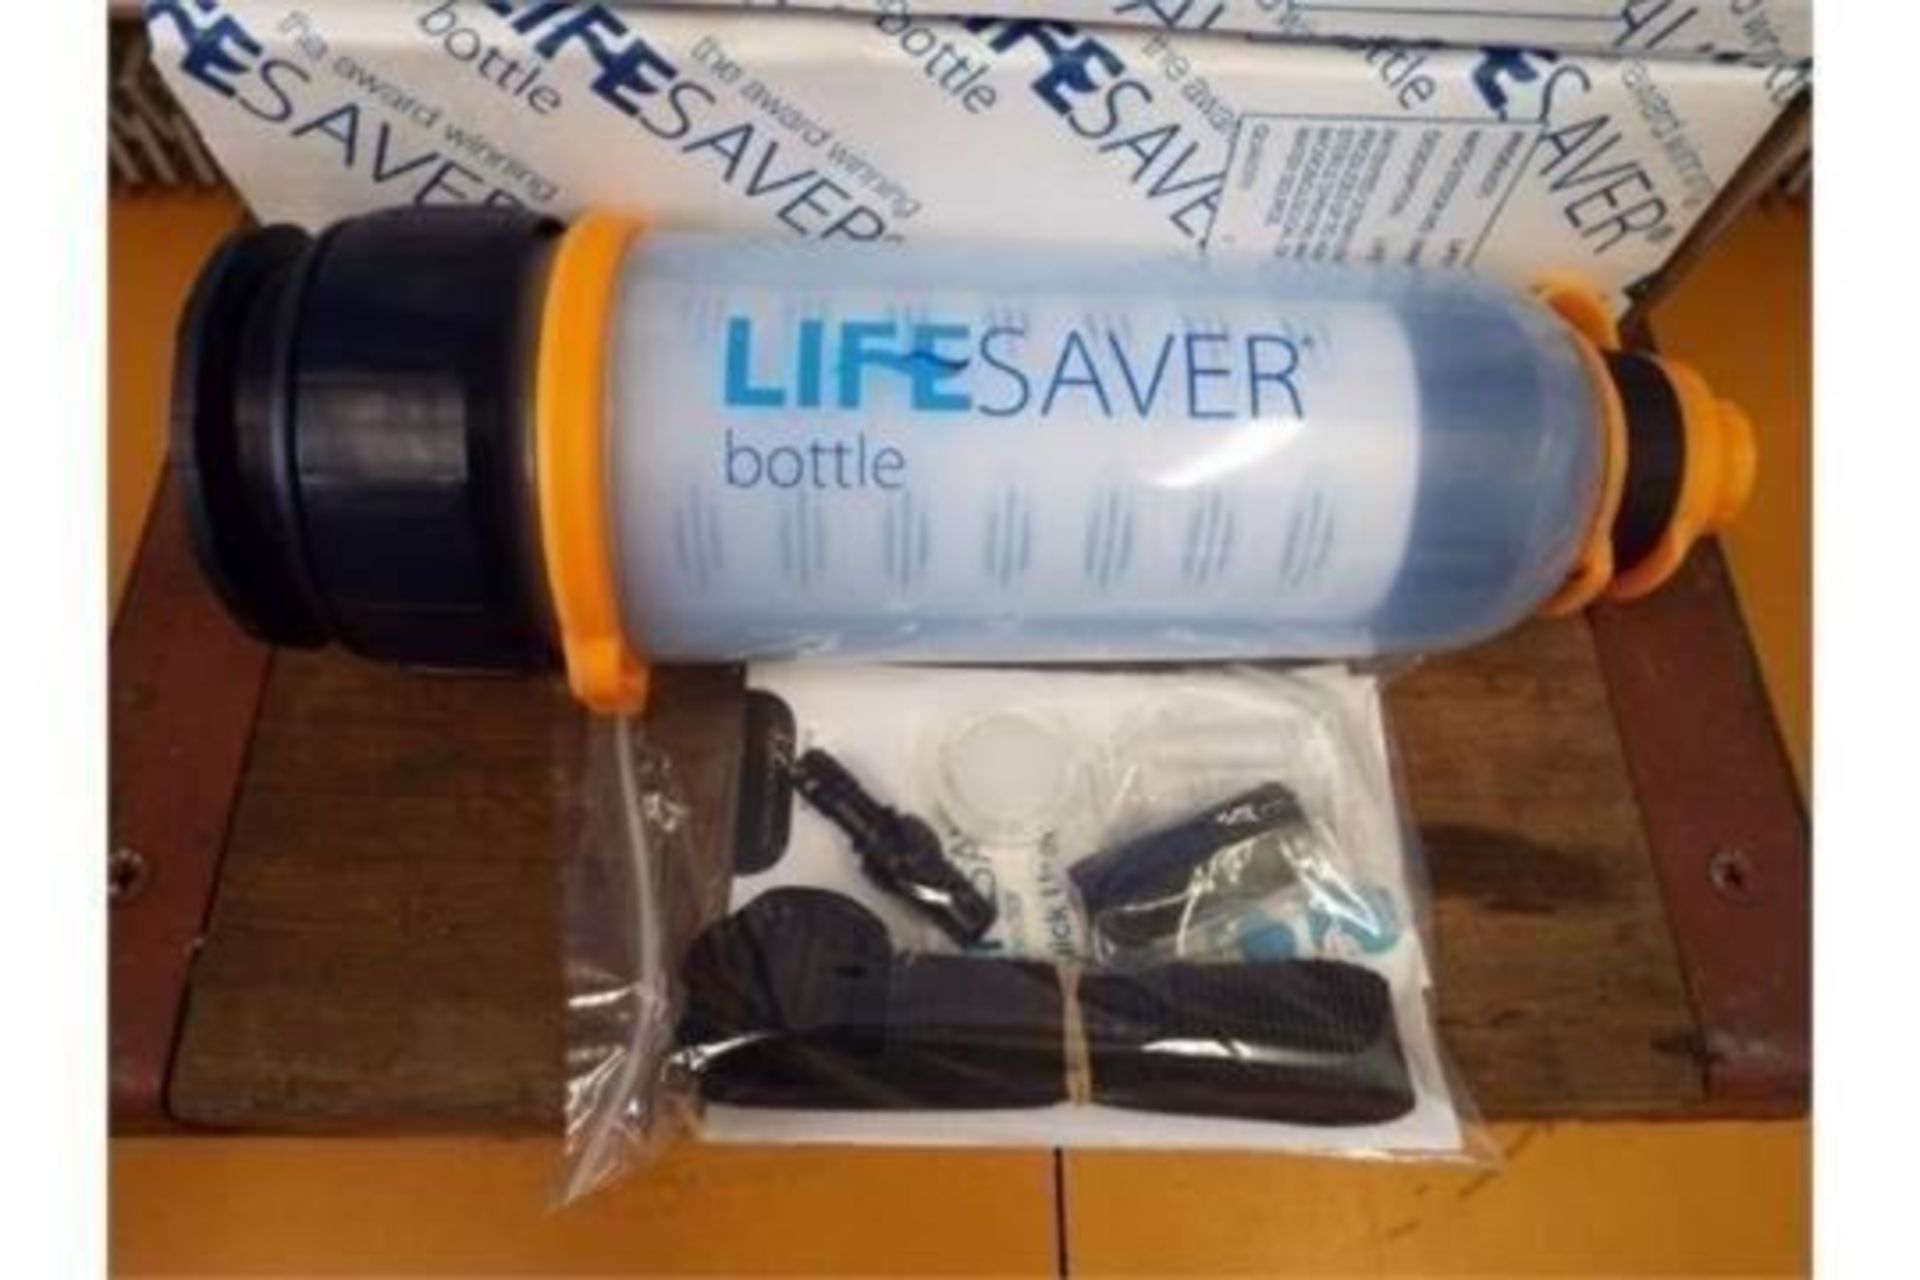 24 x Unissued Lifesaver 400UF ultra filtration water bottles, with storage box - Image 3 of 7